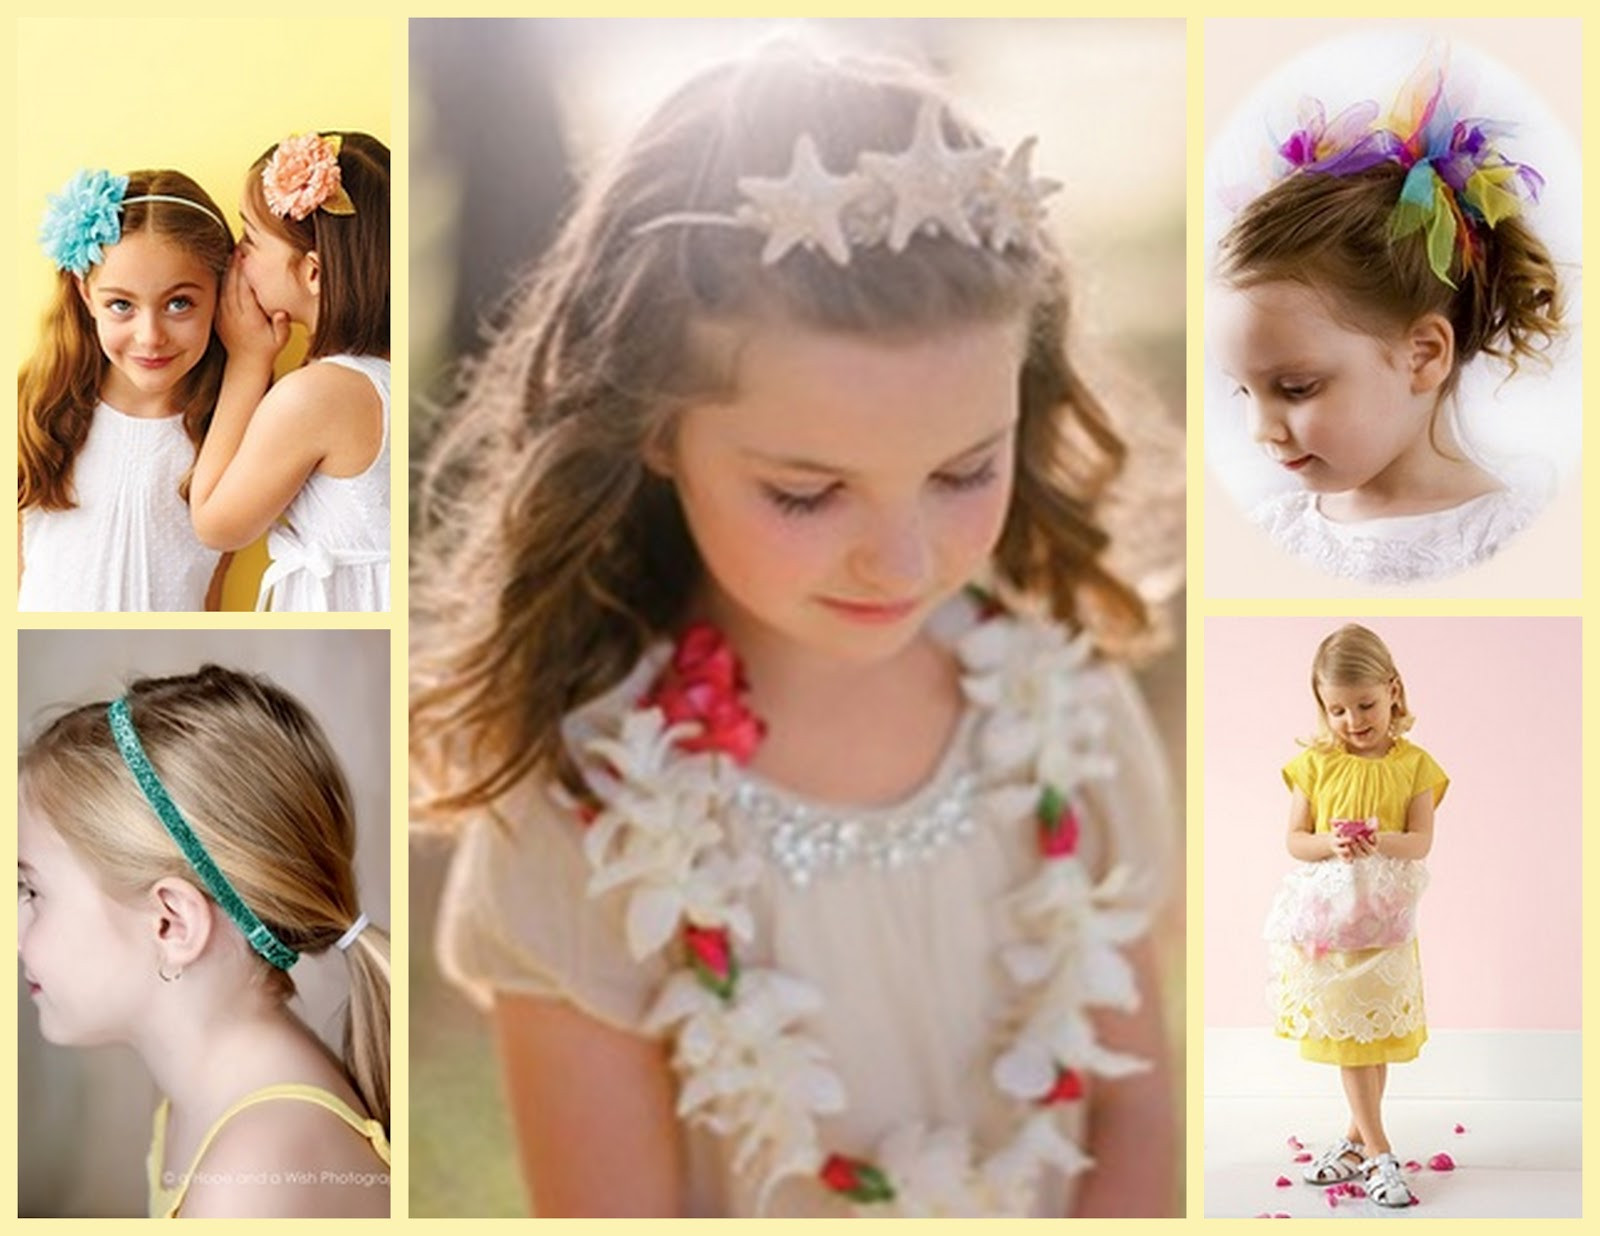 Girly Hairstyles For Little Girls
 Little Girls Hairdos Girly Hairbows Headbands and Pinafore